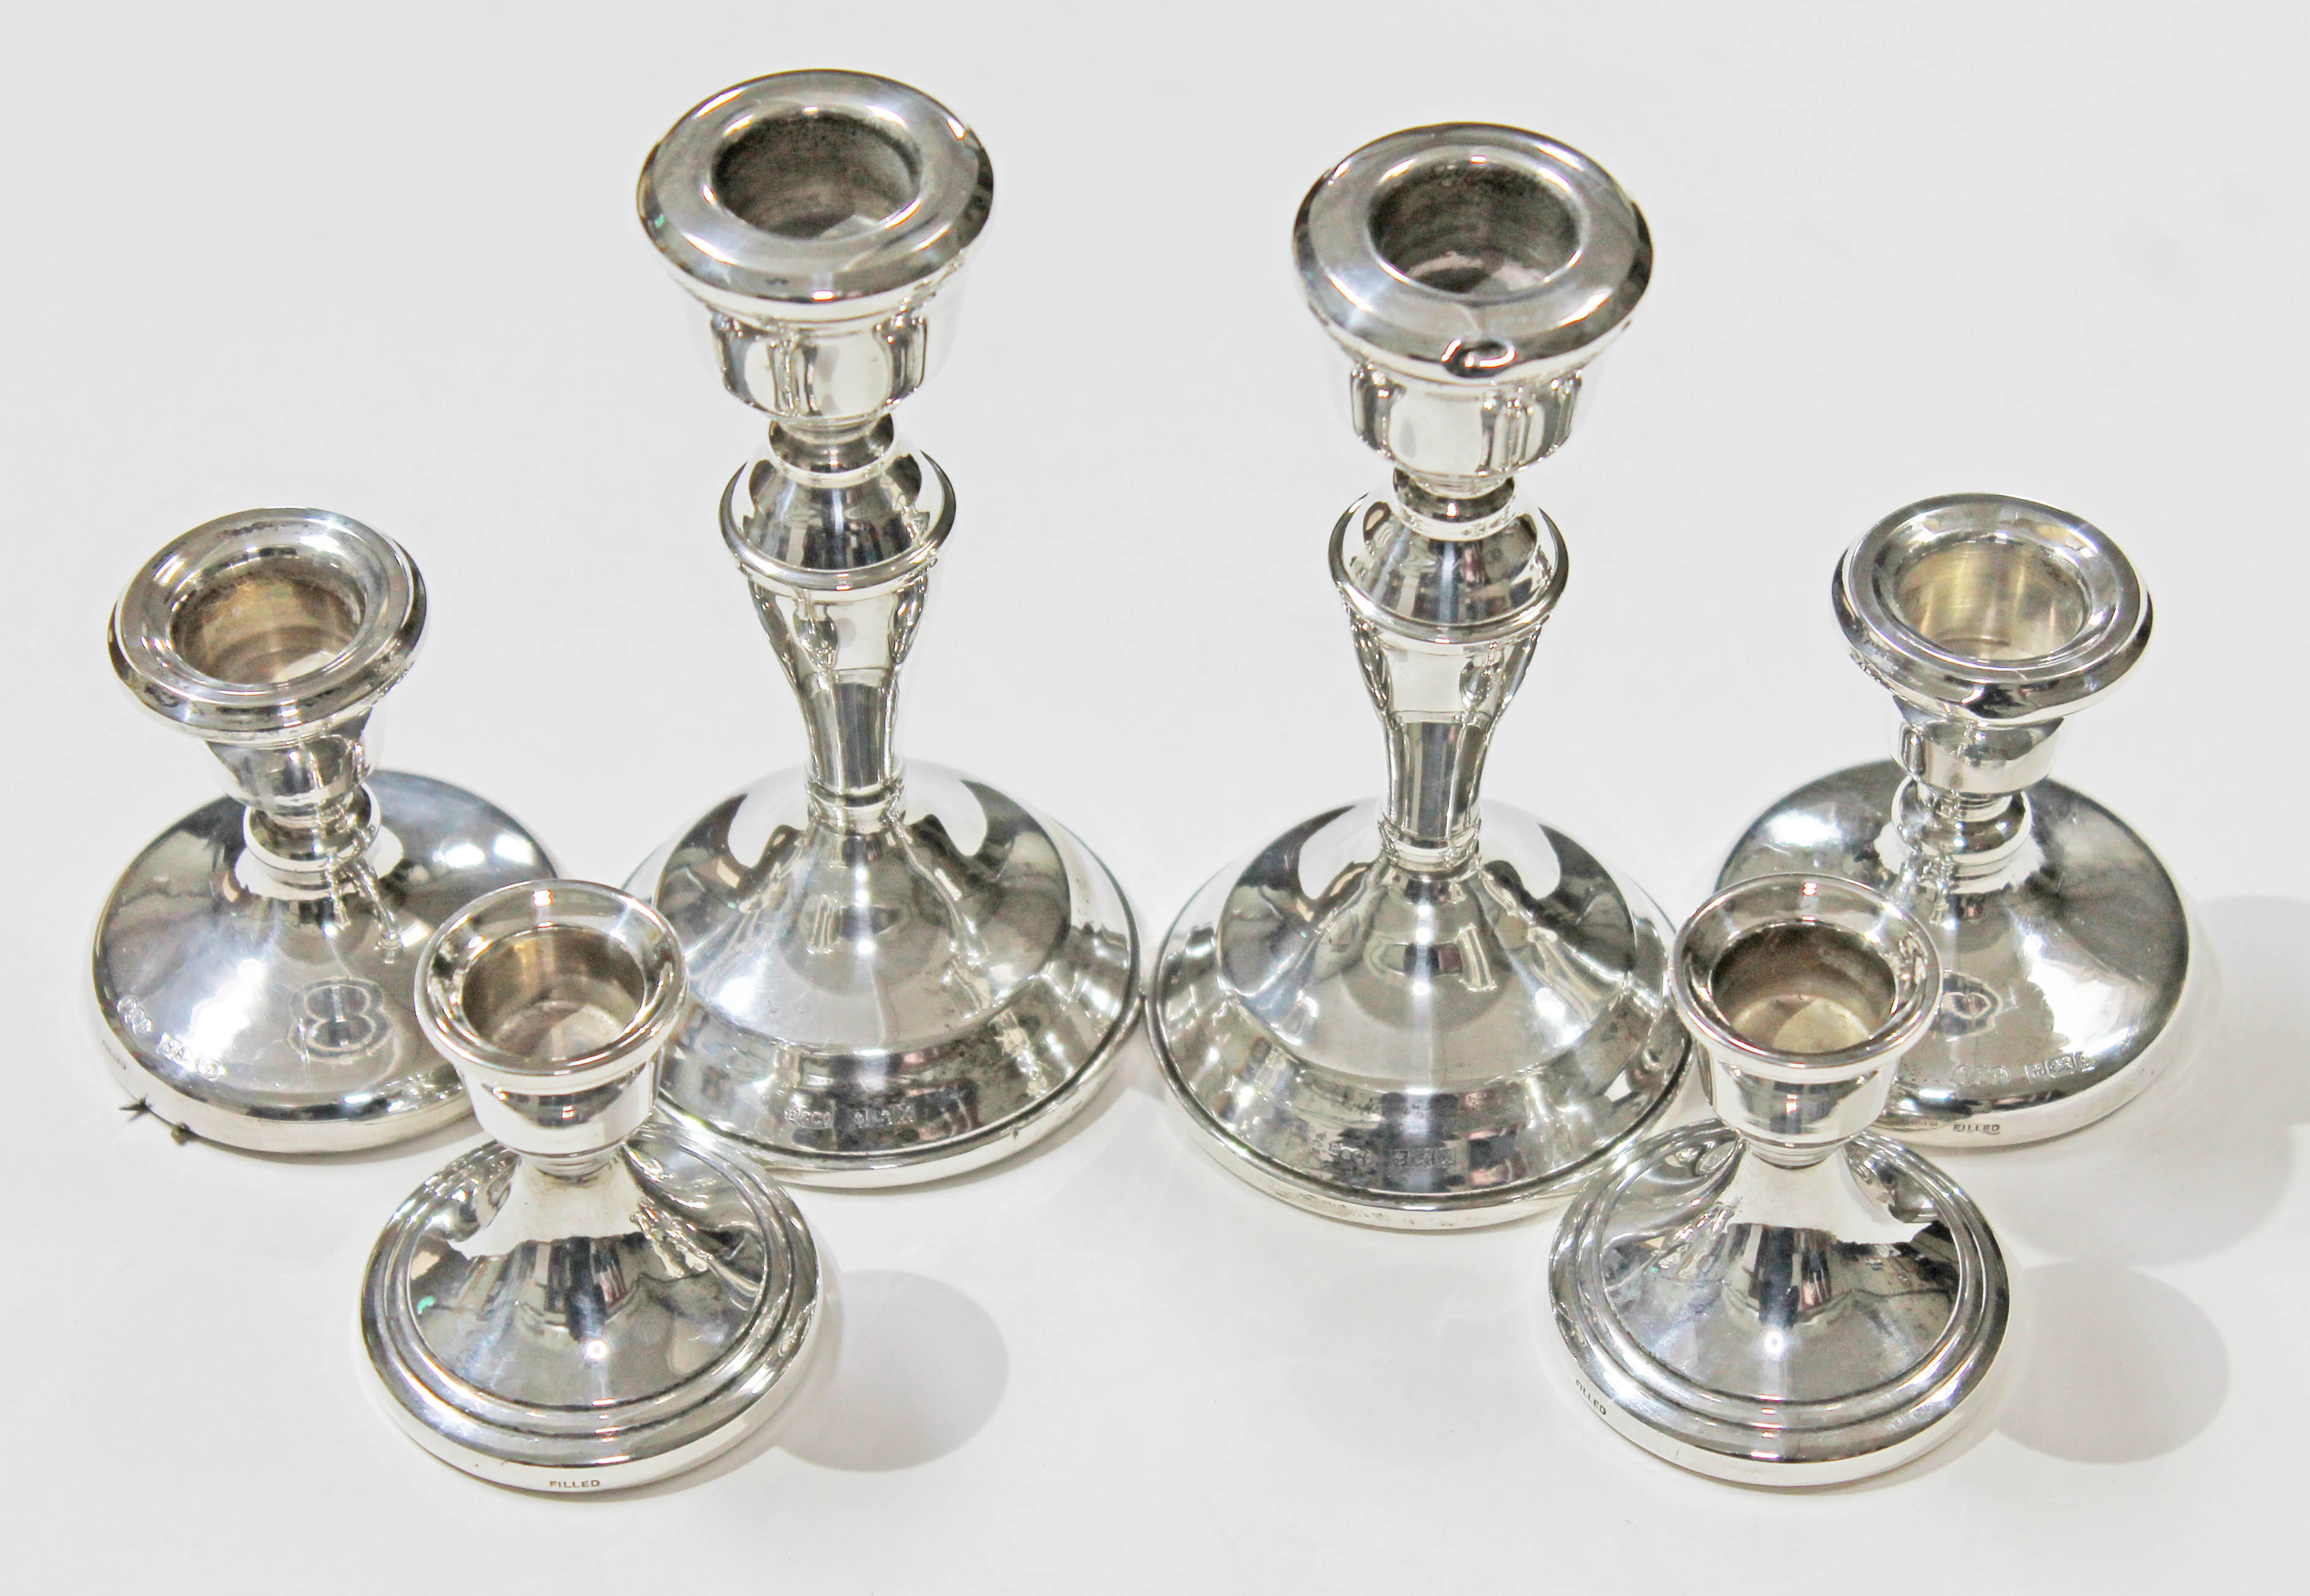 Three pairs of hallmarked silver candlesticks, heights 6cm to 13cm. Condition - ding to rim of